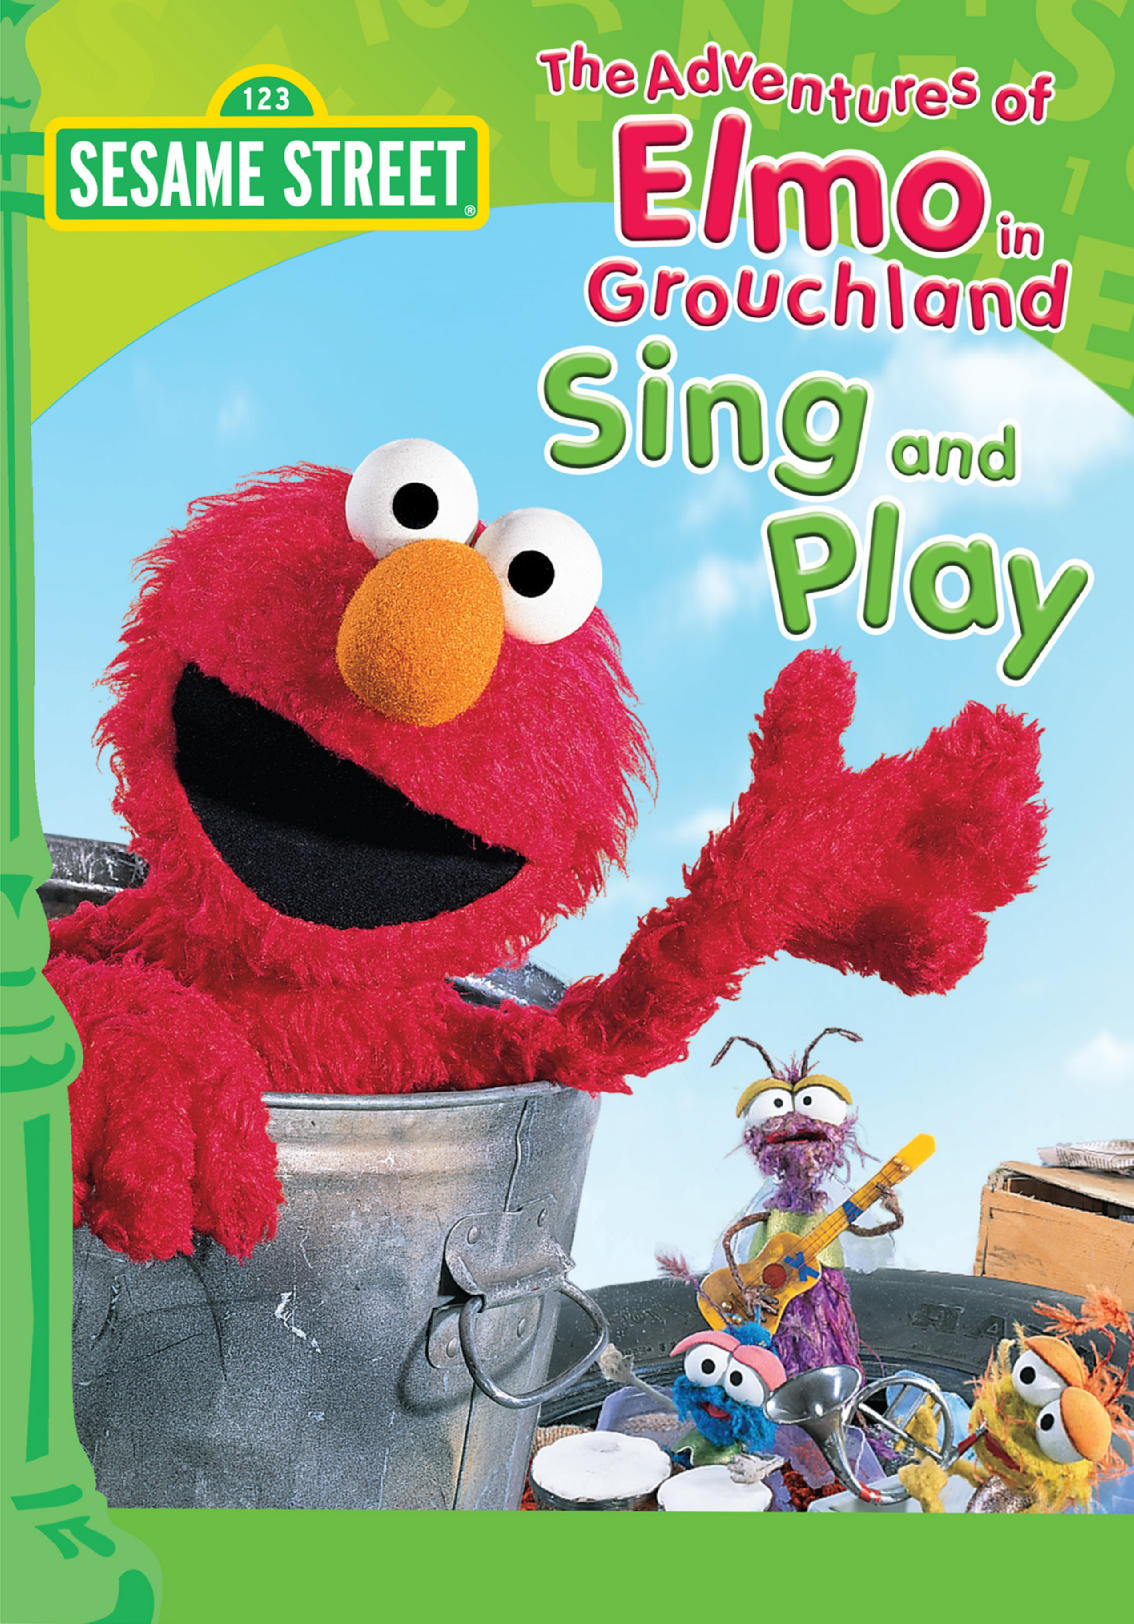 Sing and play 3. Sesame Street Elmo in Grouchland. The Adventures of Elmo in Grouchland Elmo. Best of Elmo.